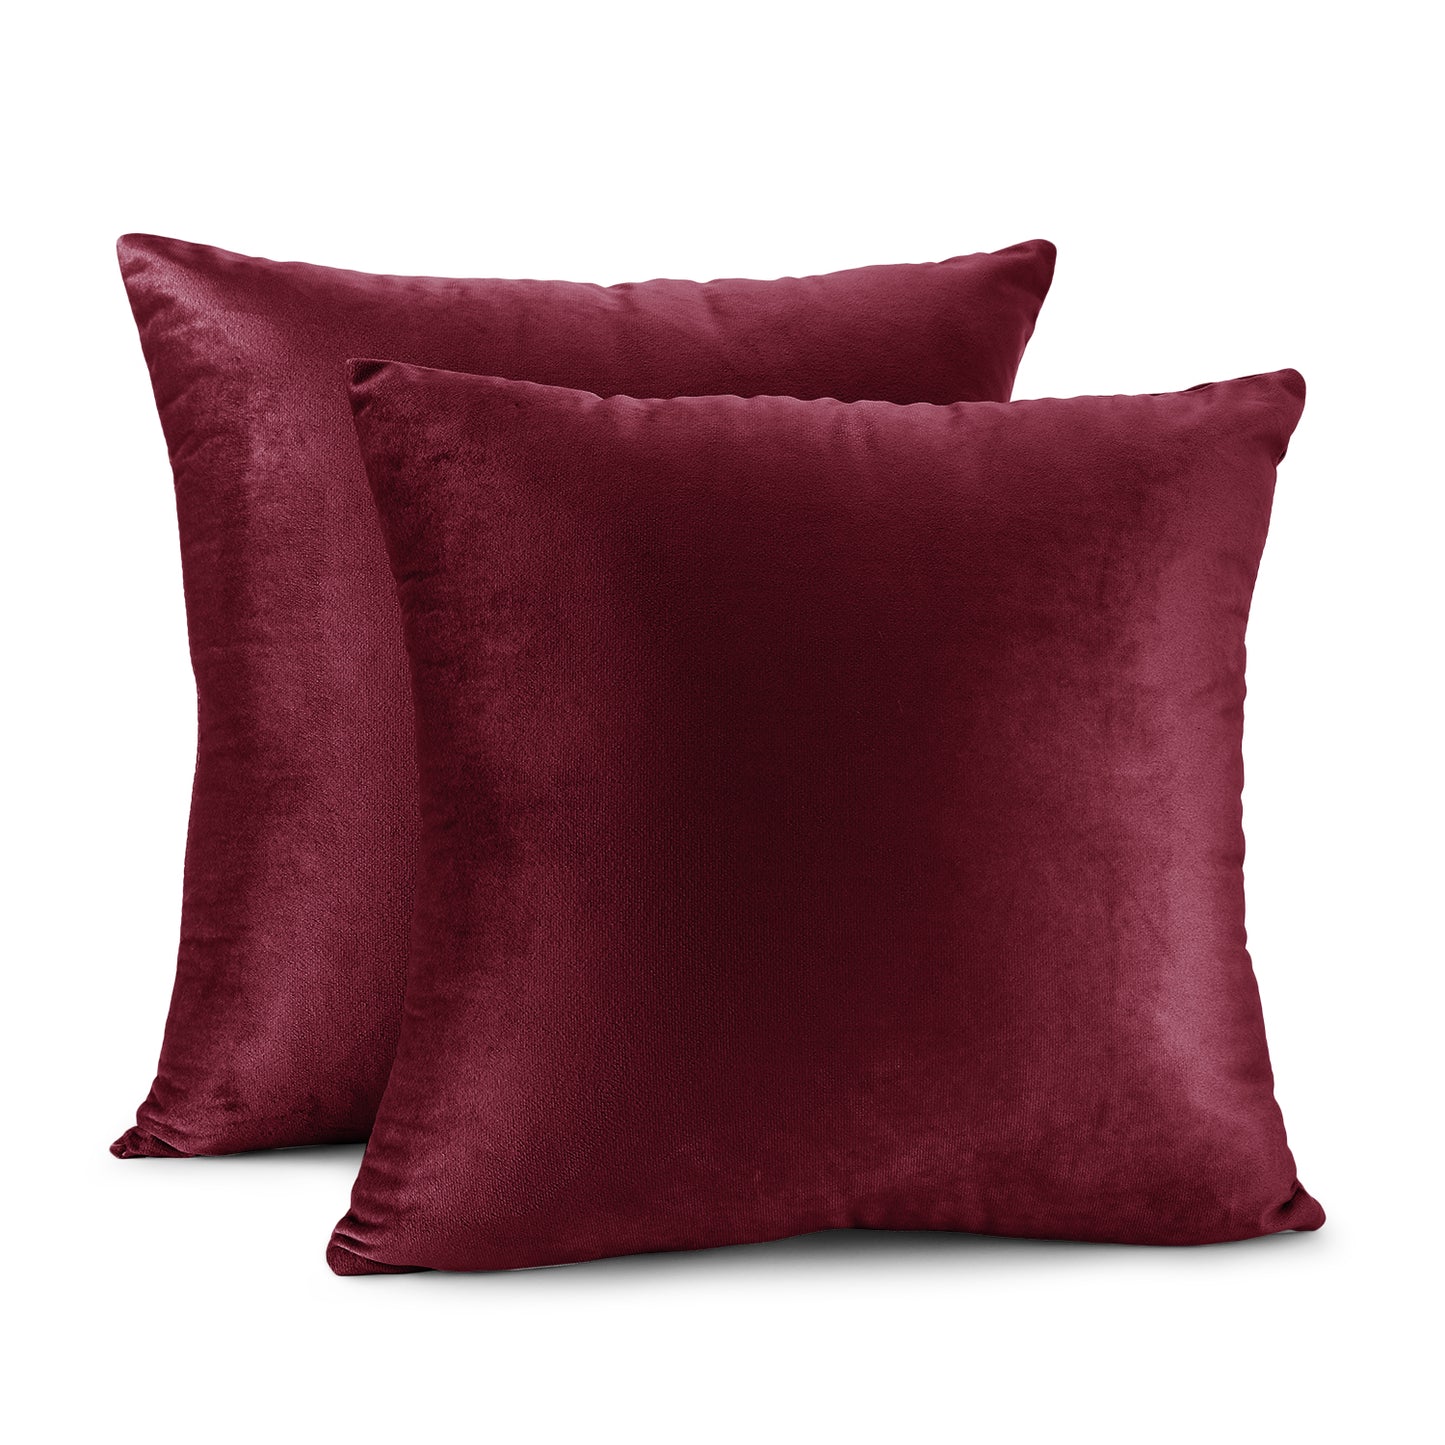 Nestl Bedding Throw Pillow Covers, Cozy Velvet Decorative Outdoor Pillow Covers 24x24 & 26x26 Inches, Soft Solid Cushion Covers for Sofa, Bed and Car, Set of 2